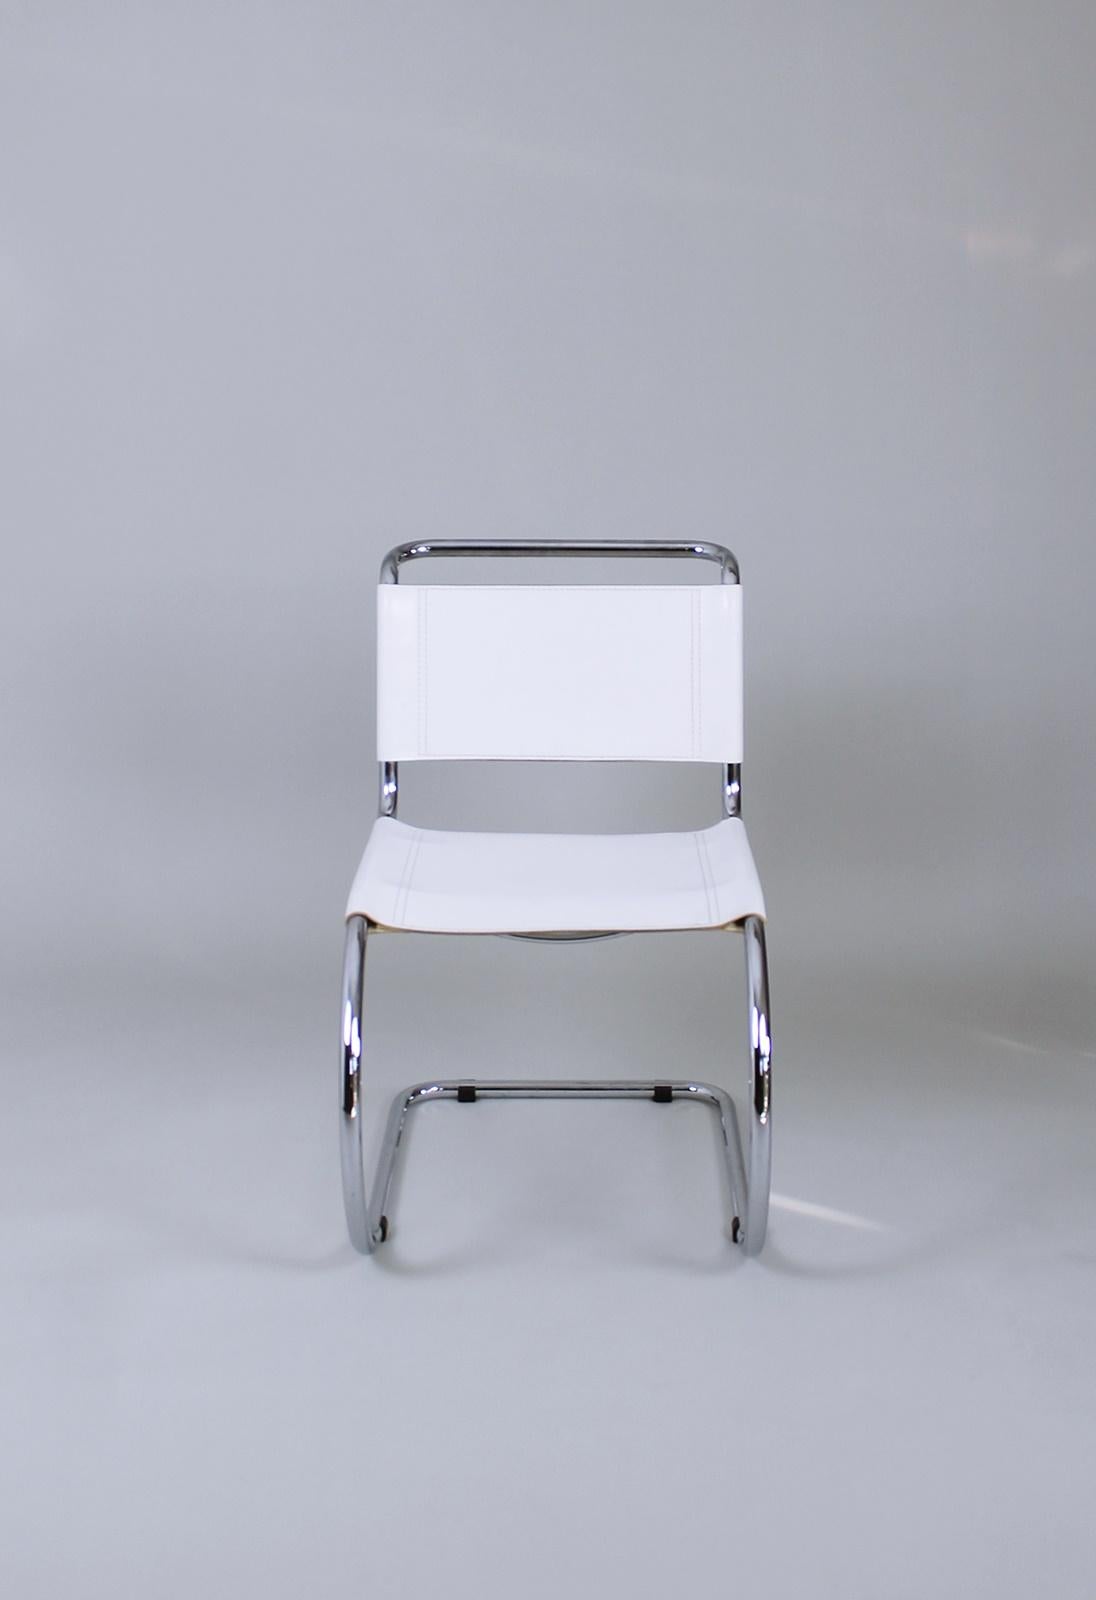 Pressed Bauhaus Classic MR 10 Chairs by Ludwig Mies van der Rohe Germany, 1980s For Sale